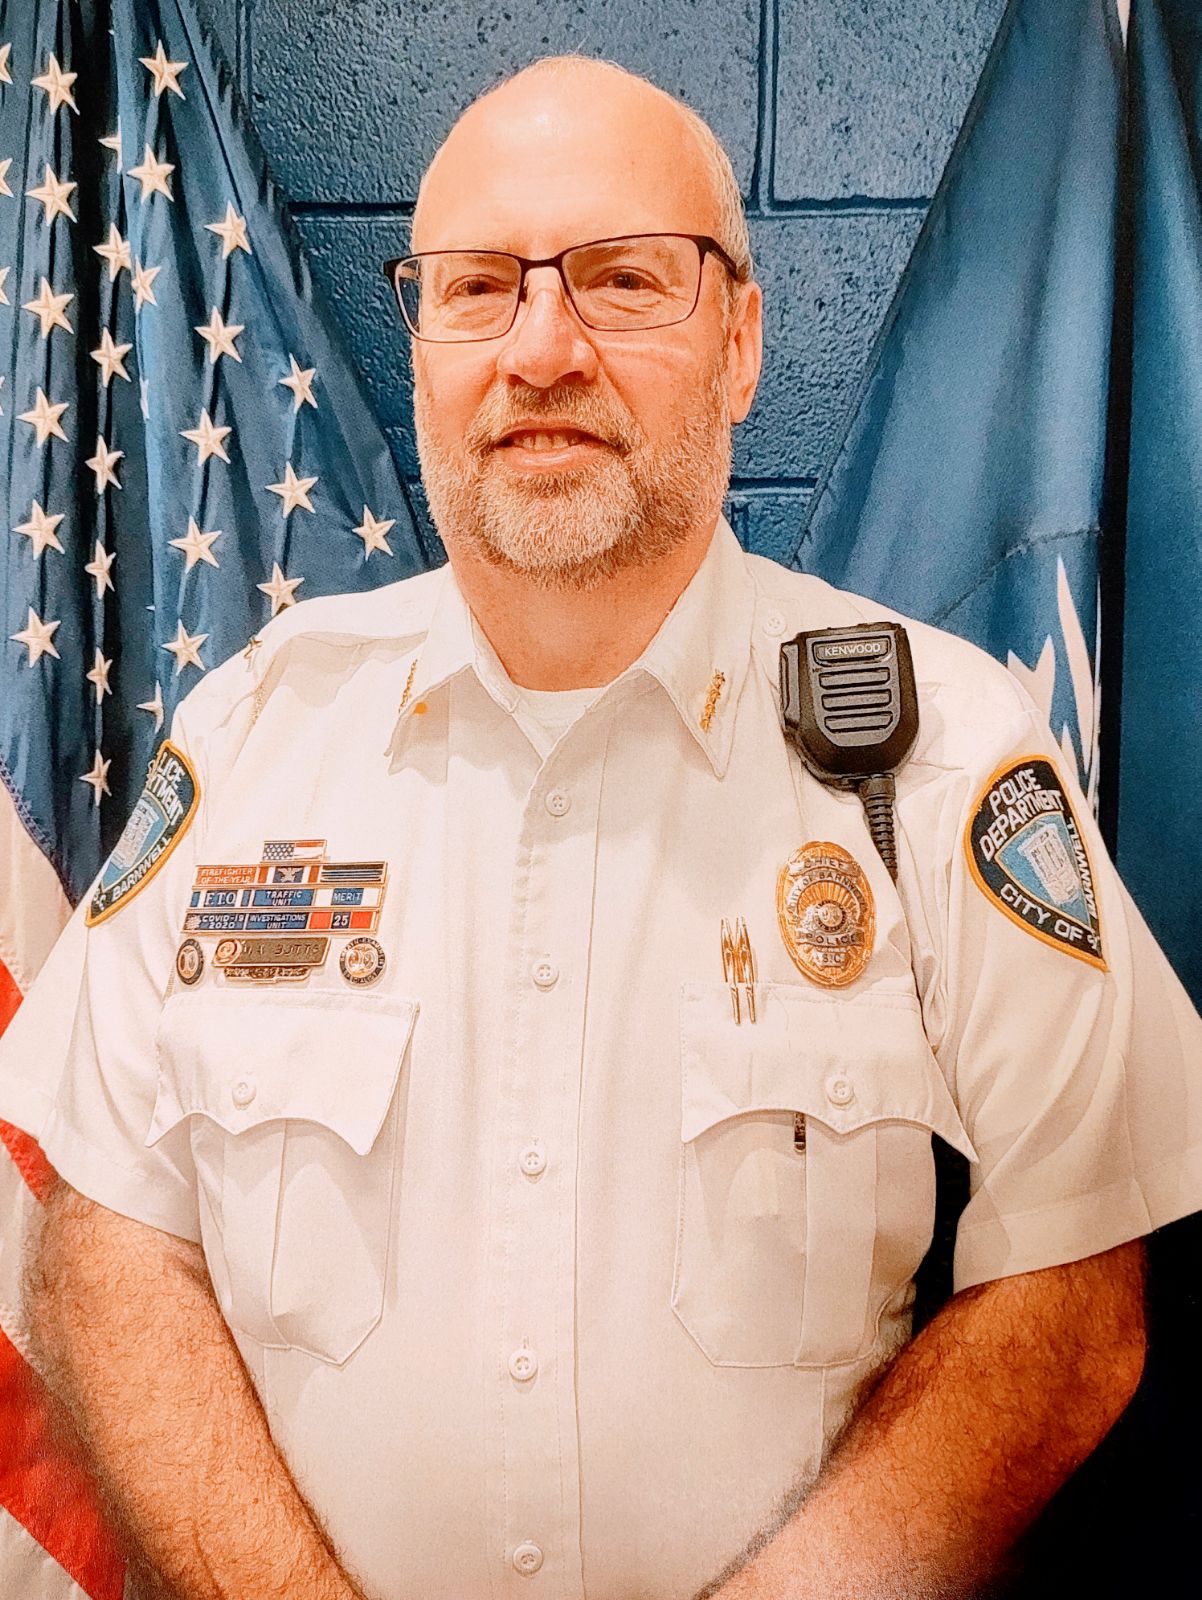 Chief Michael Butts